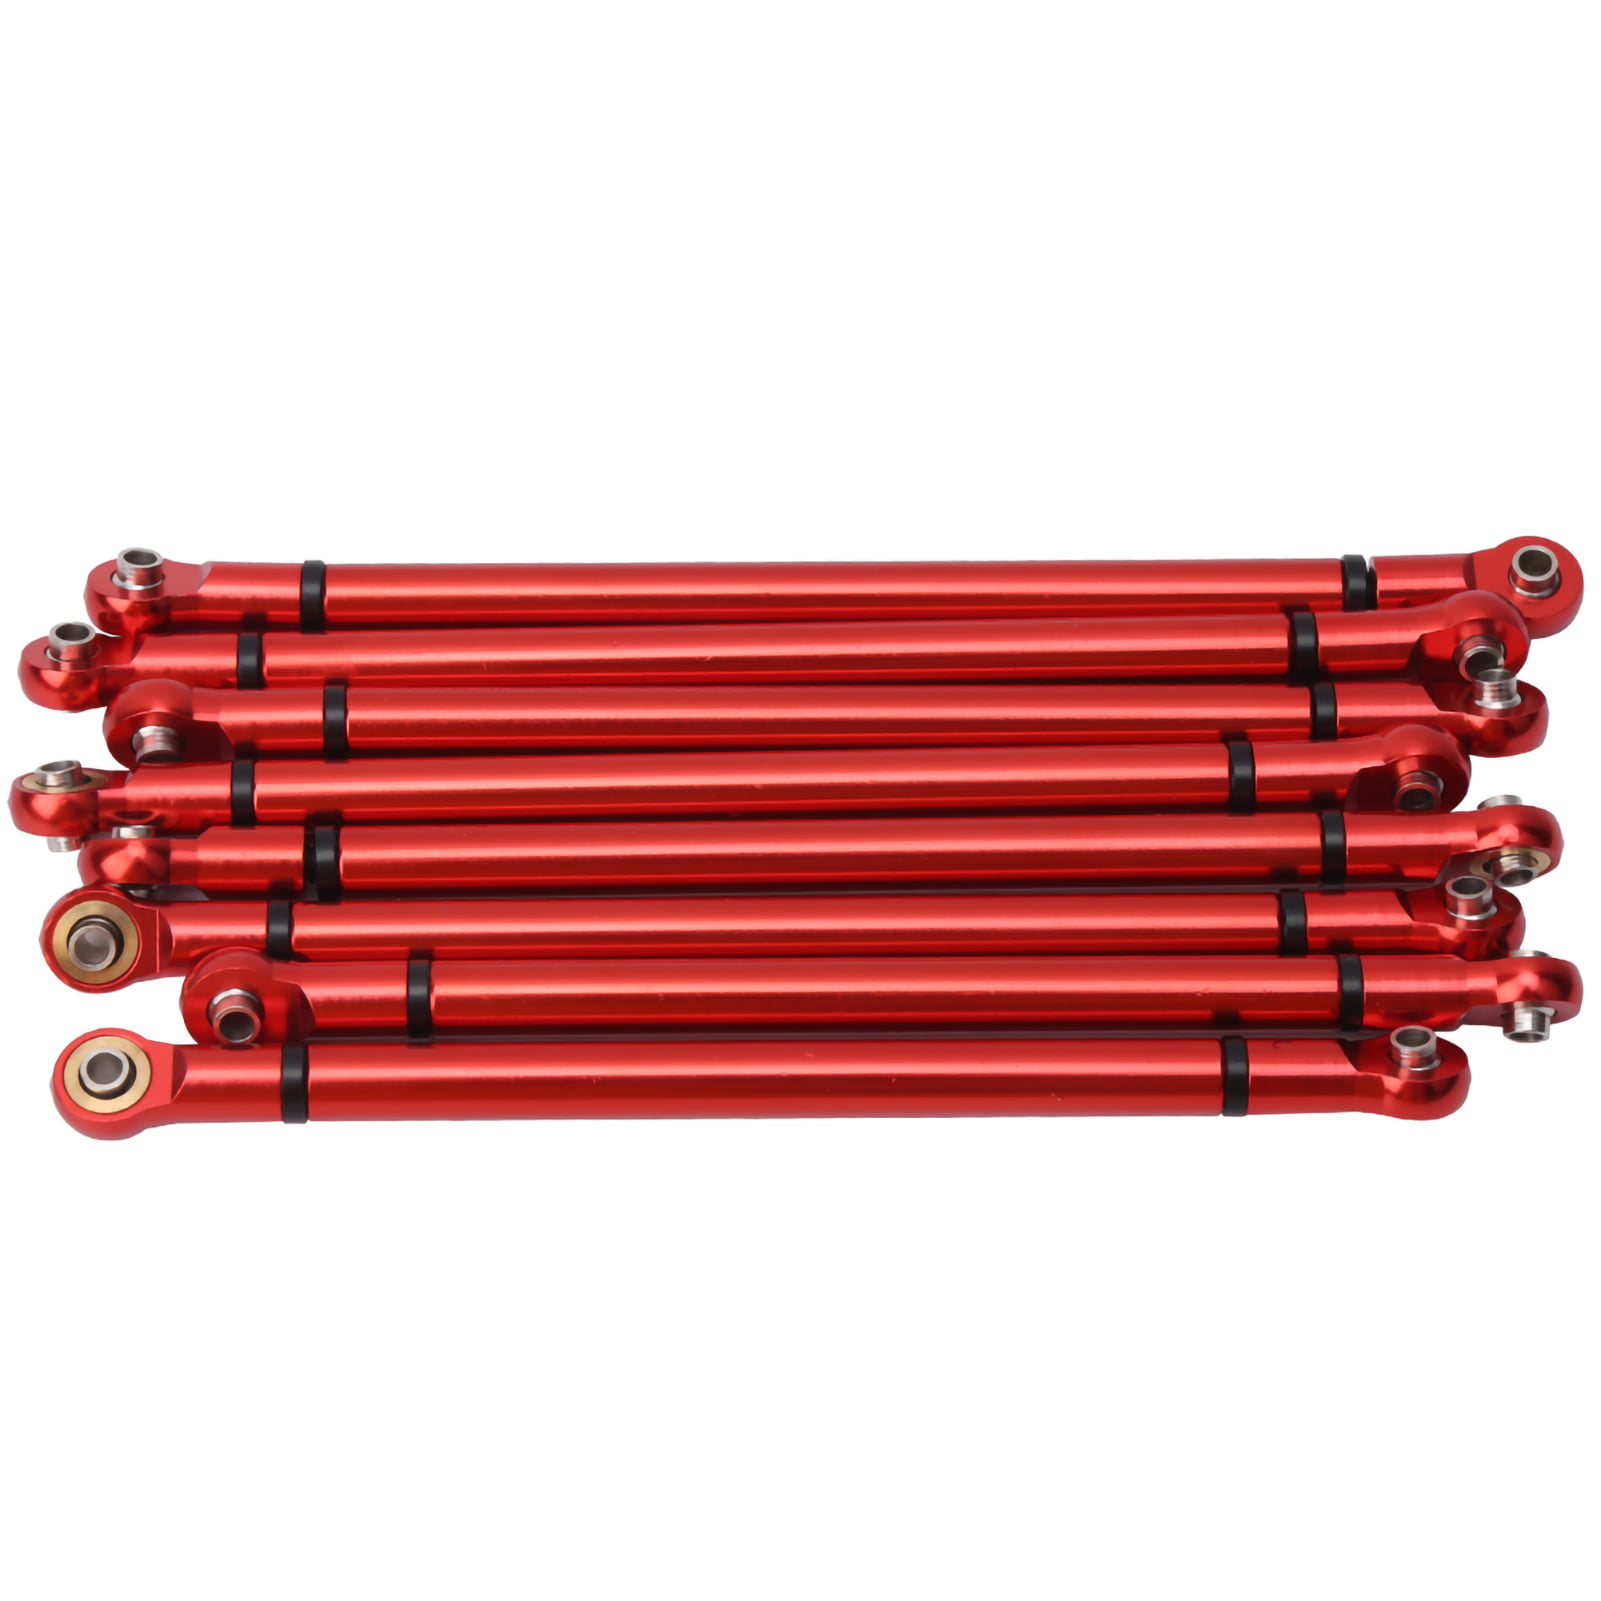 Metal Pull Rod Kit for Use Home Car Lovers Axial SCX10 313mm Axle Distance Alinory Small Size and Lightweight 1/10 Link Rod red 